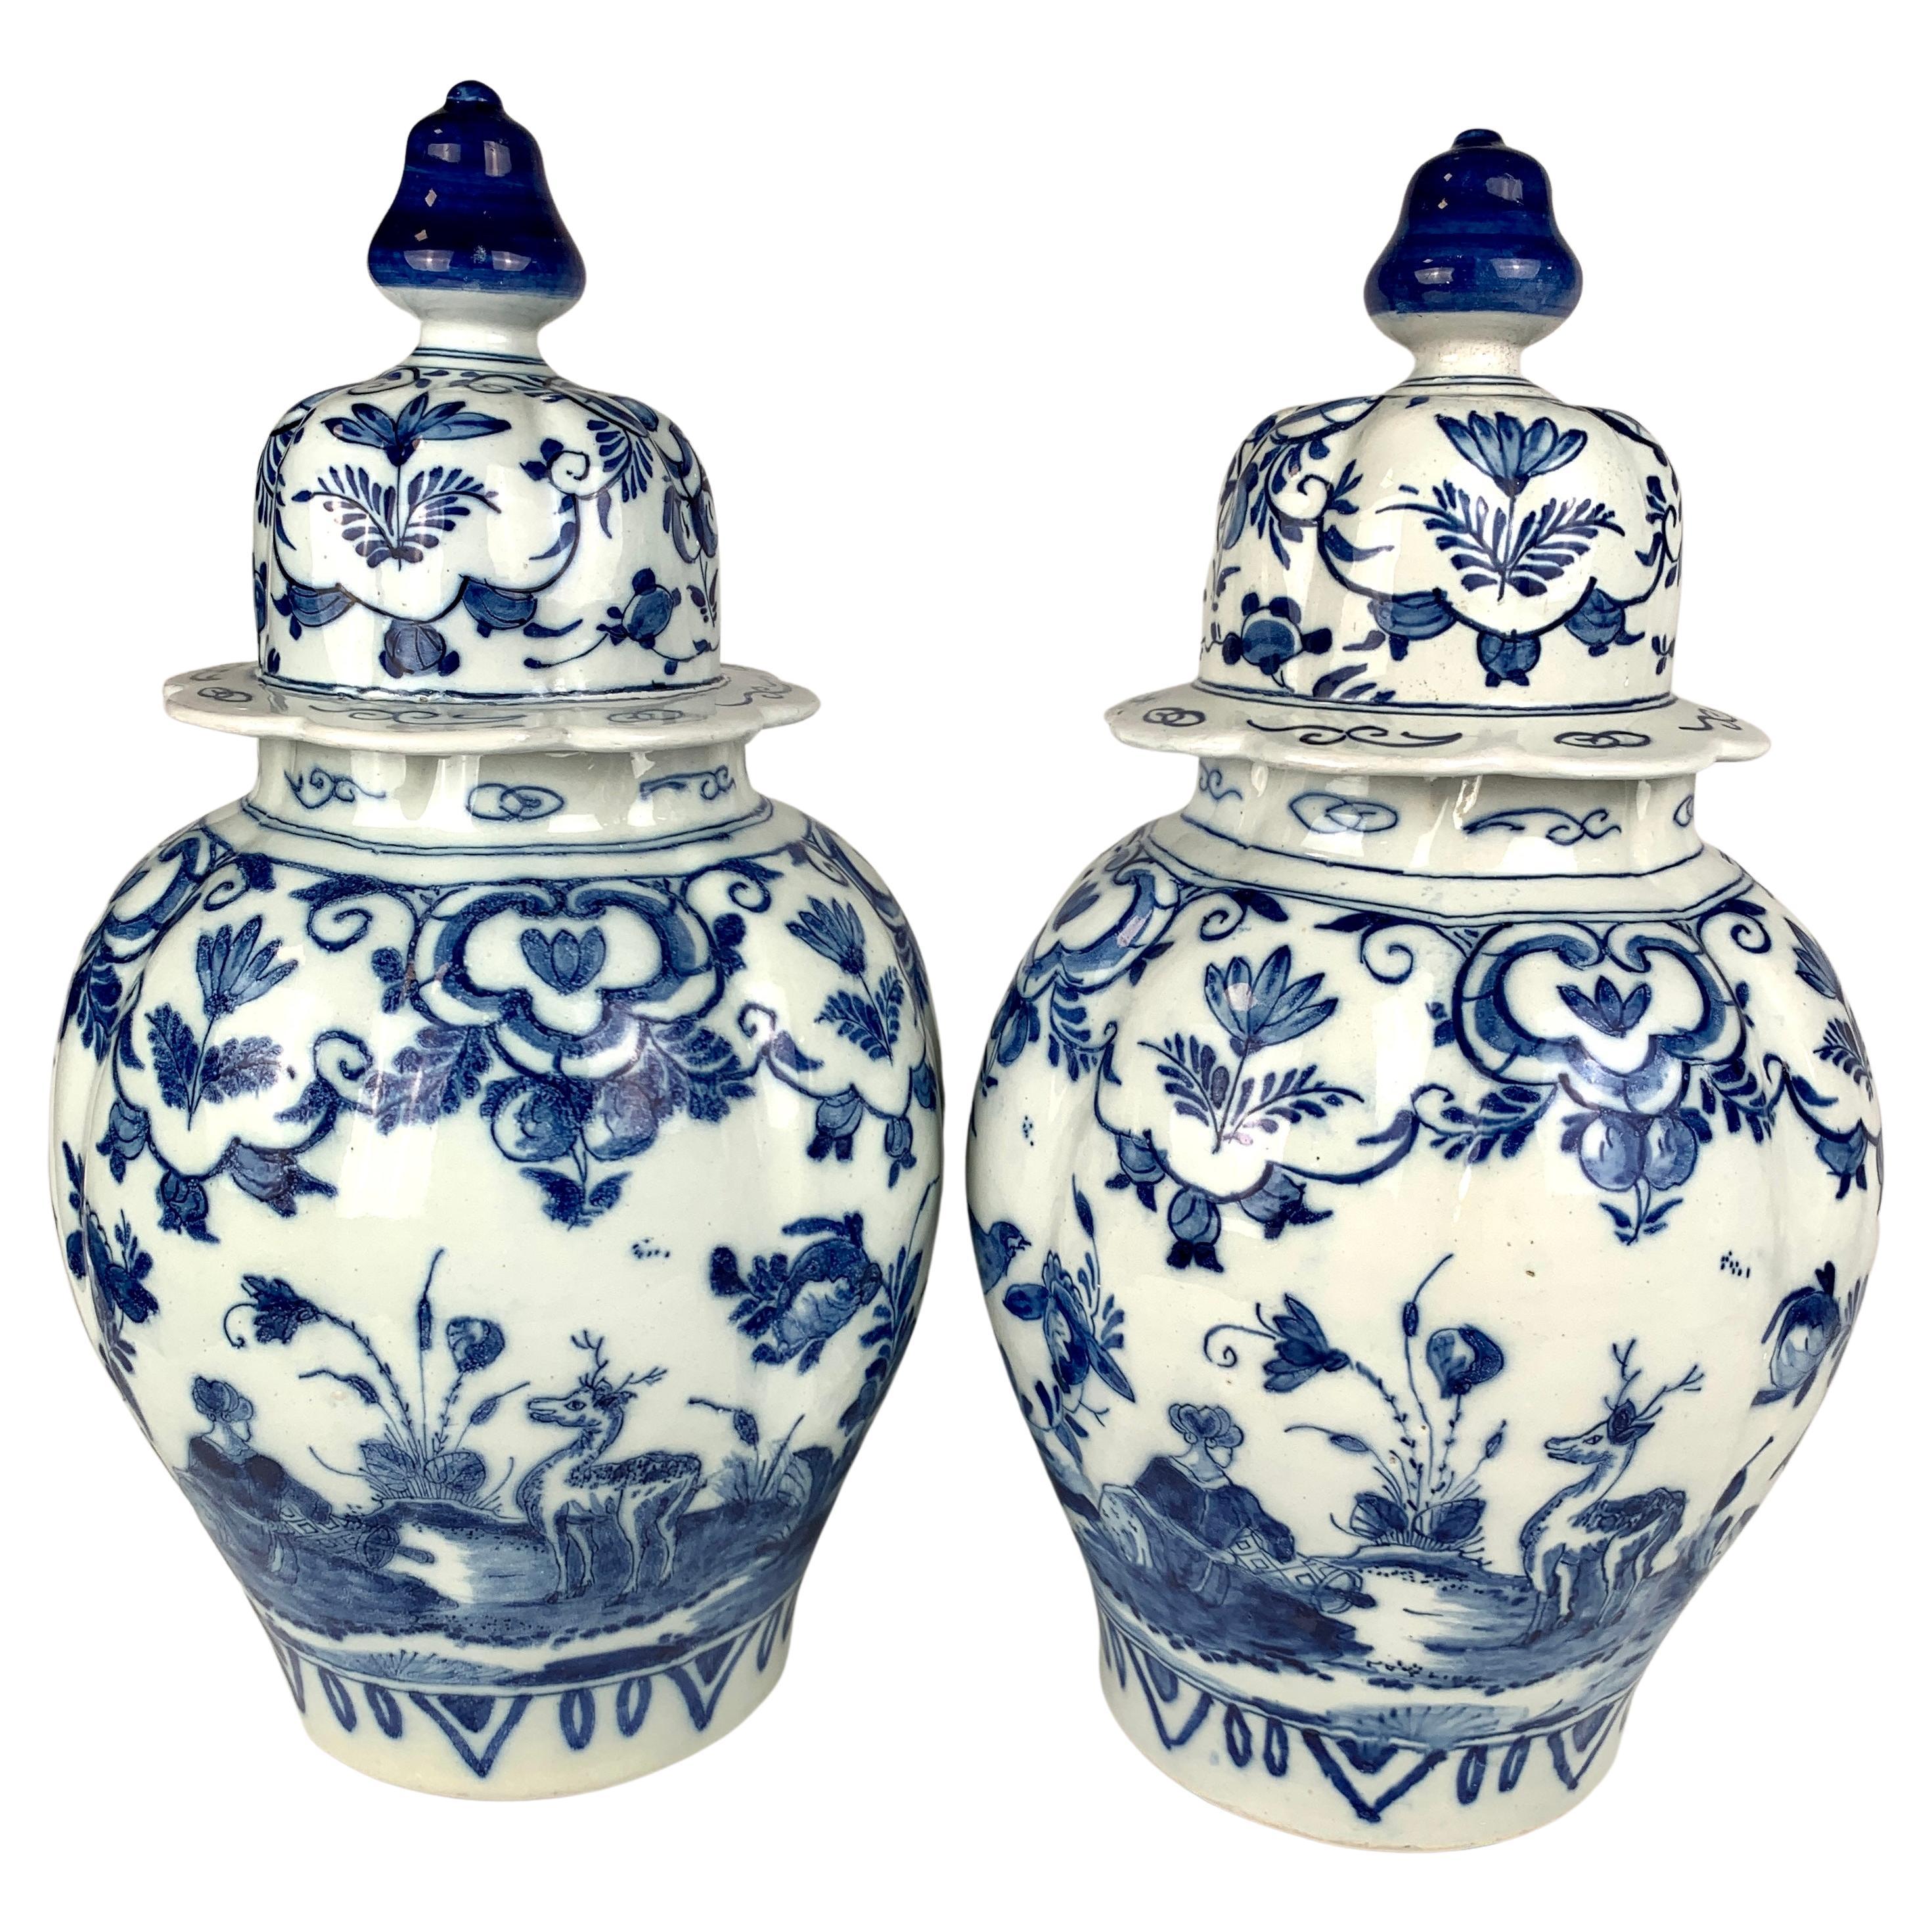 Pair Blue and White Delft Jars Hand Painted 18th Century Netherlands, Circa 1780